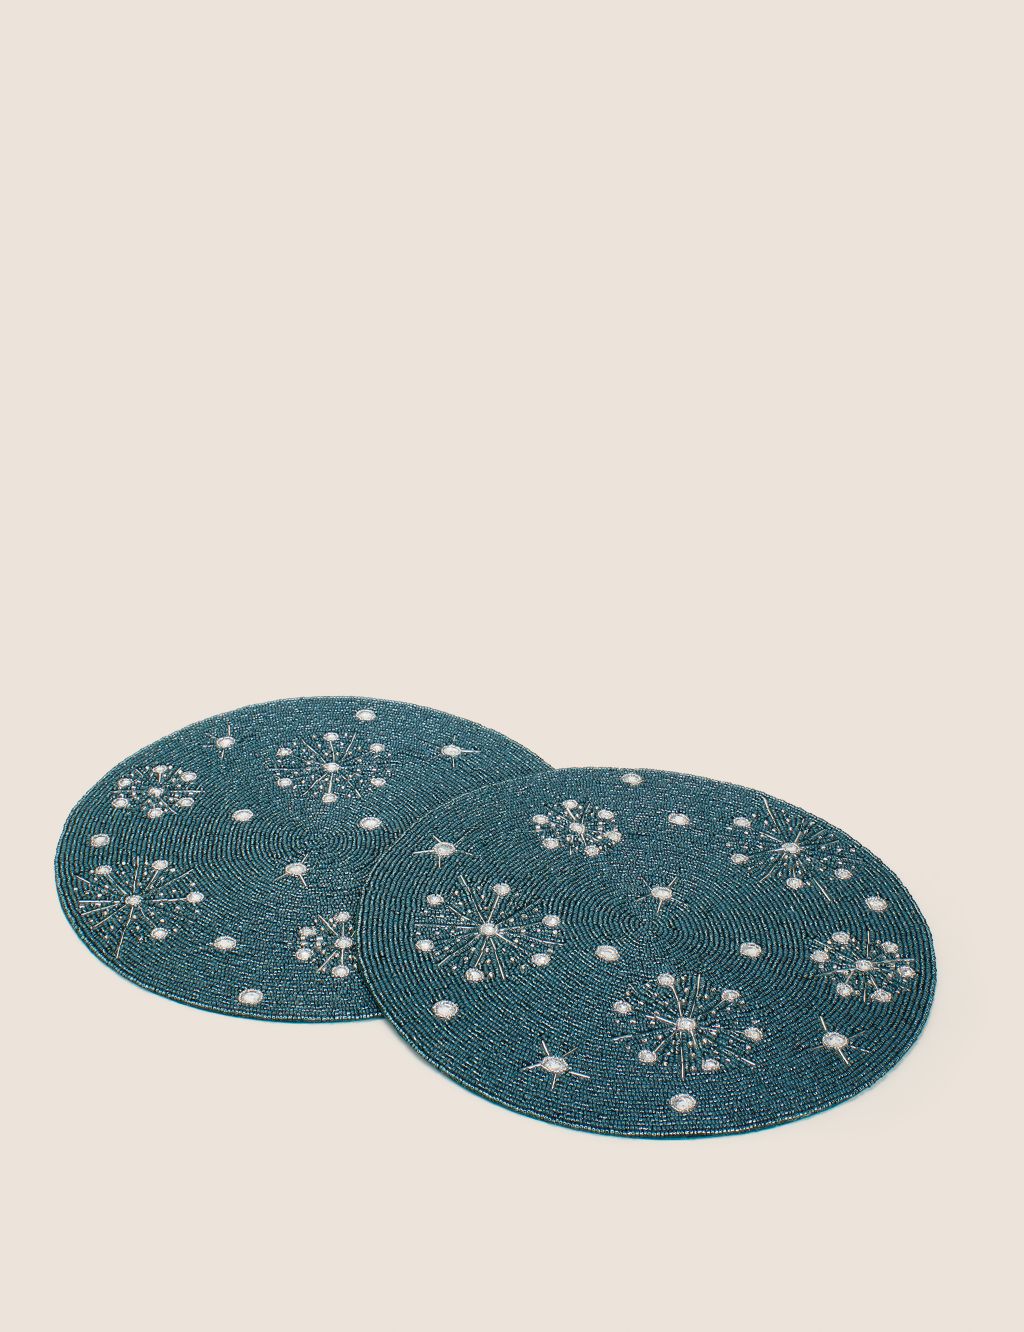 Set of 2 Snowflake Beaded Placemats image 1